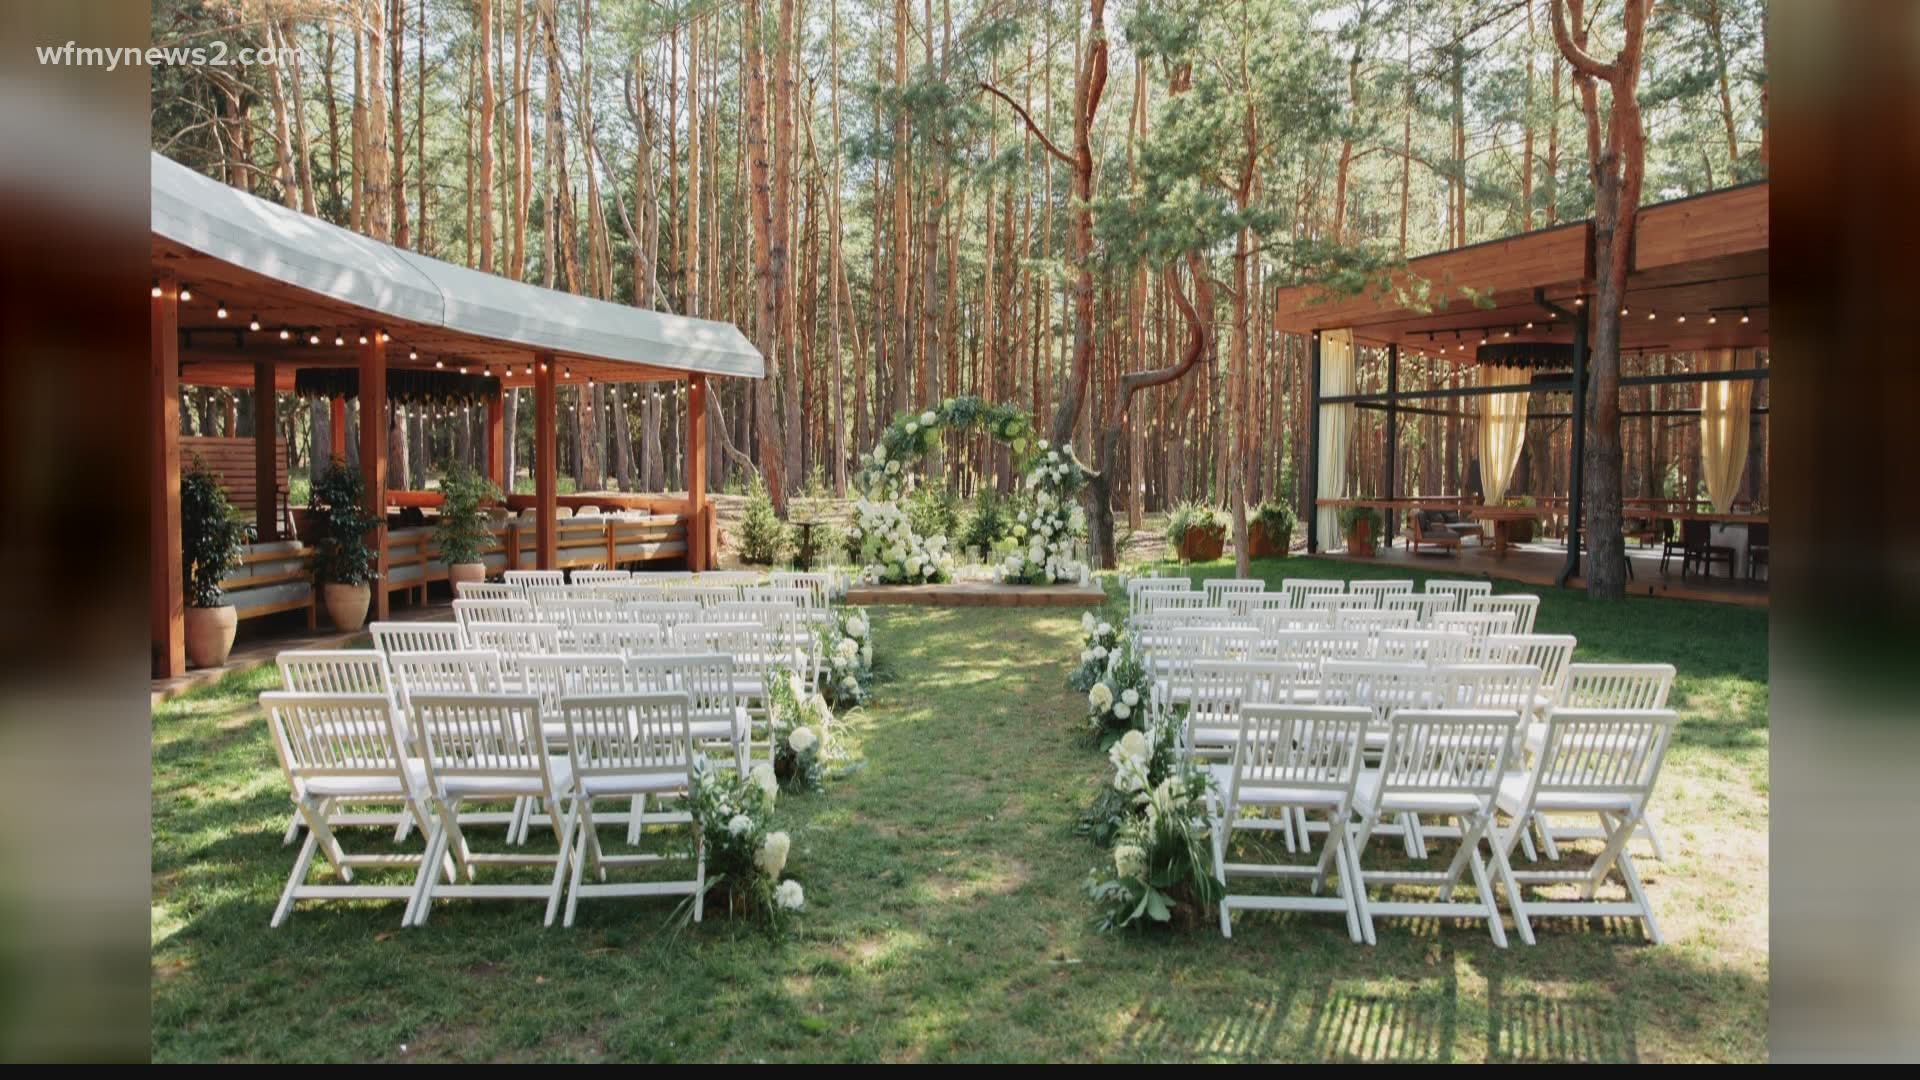 Invited To A Wedding Know The Reception Capacity Rules Wfmynews2 Com